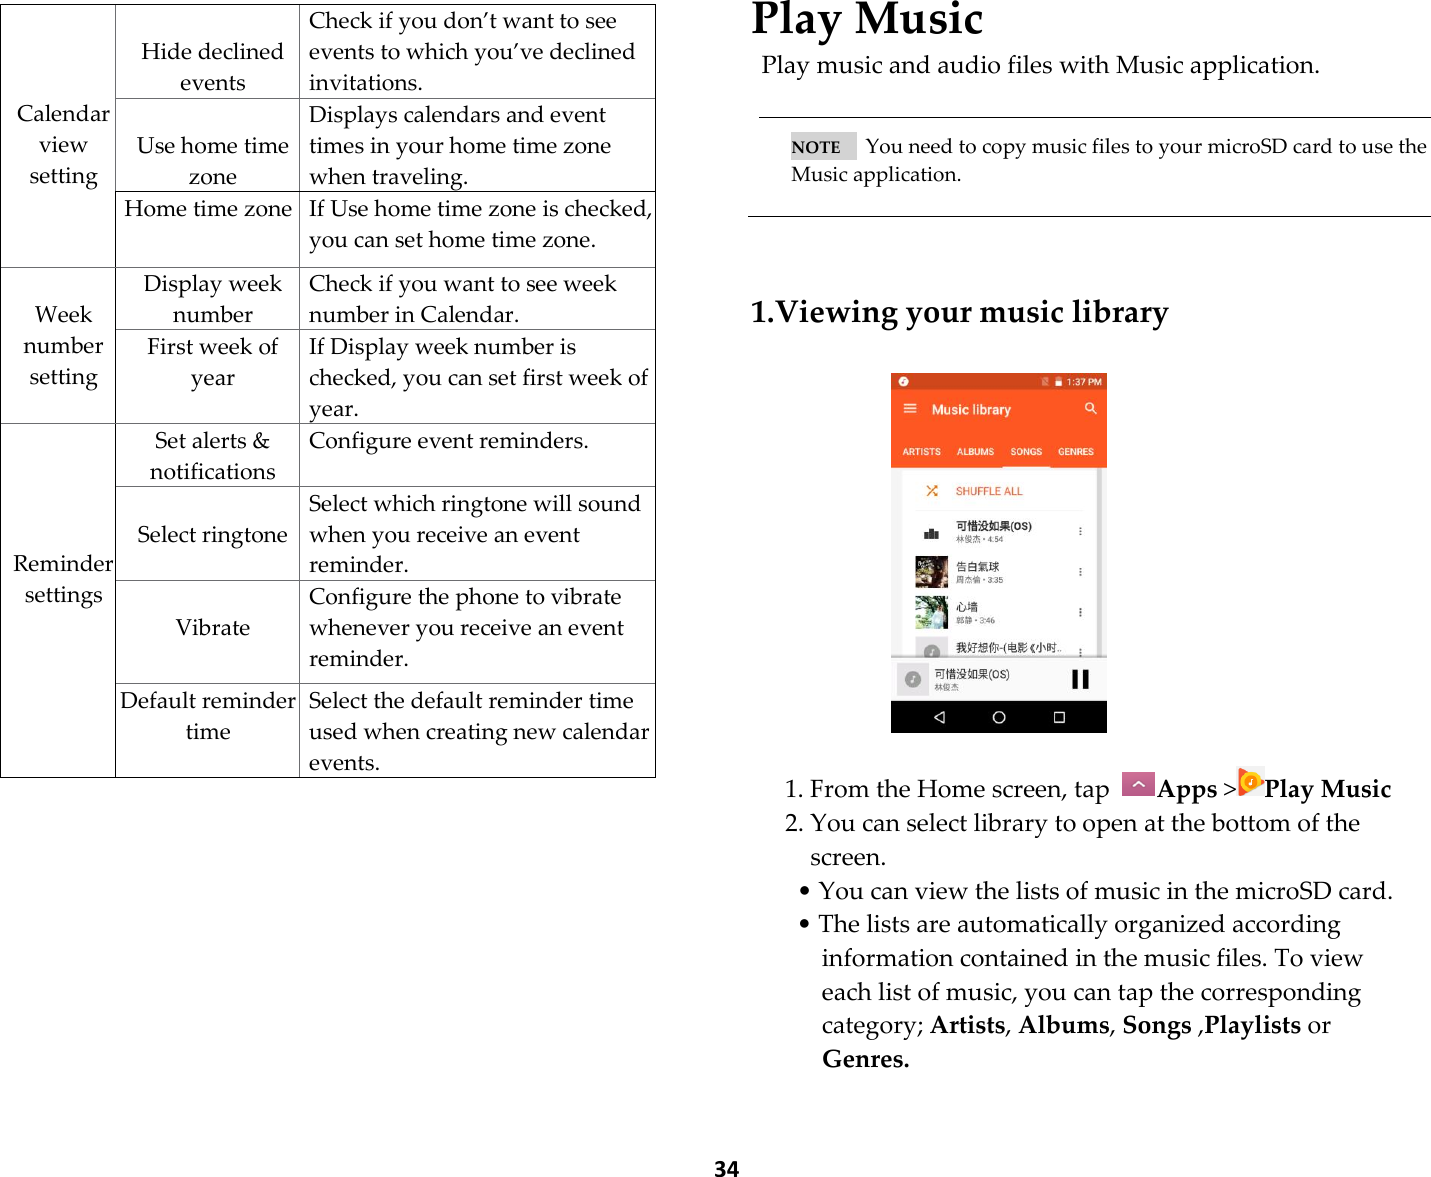  34      Play Music Play music and audio files with Music application.   NOTE      You need to copy music files to your microSD card to use the Music application.    1.Viewing your music library     1. From the Home screen, tap  Apps &gt;Play Music 2. You can select library to open at the bottom of the screen. • You can view the lists of music in the microSD card. • The lists are automatically organized according information contained in the music files. To view each list of music, you can tap the corresponding category; Artists, Albums, Songs ,Playlists or Genres.    Calendar view setting  Hide declined events Check if you don’t want to see events to which you’ve declined invitations.  Use home time zone Displays calendars and event times in your home time zone when traveling. Home time zone If Use home time zone is checked, you can set home time zone.  Week number setting Display week number Check if you want to see week number in Calendar. First week of year If Display week number is checked, you can set first week of year.     Reminder settings Set alerts &amp; notifications Configure event reminders.  Select ringtone Select which ringtone will sound when you receive an event reminder.  Vibrate Configure the phone to vibrate whenever you receive an event reminder. Default reminder time Select the default reminder time used when creating new calendar events. 